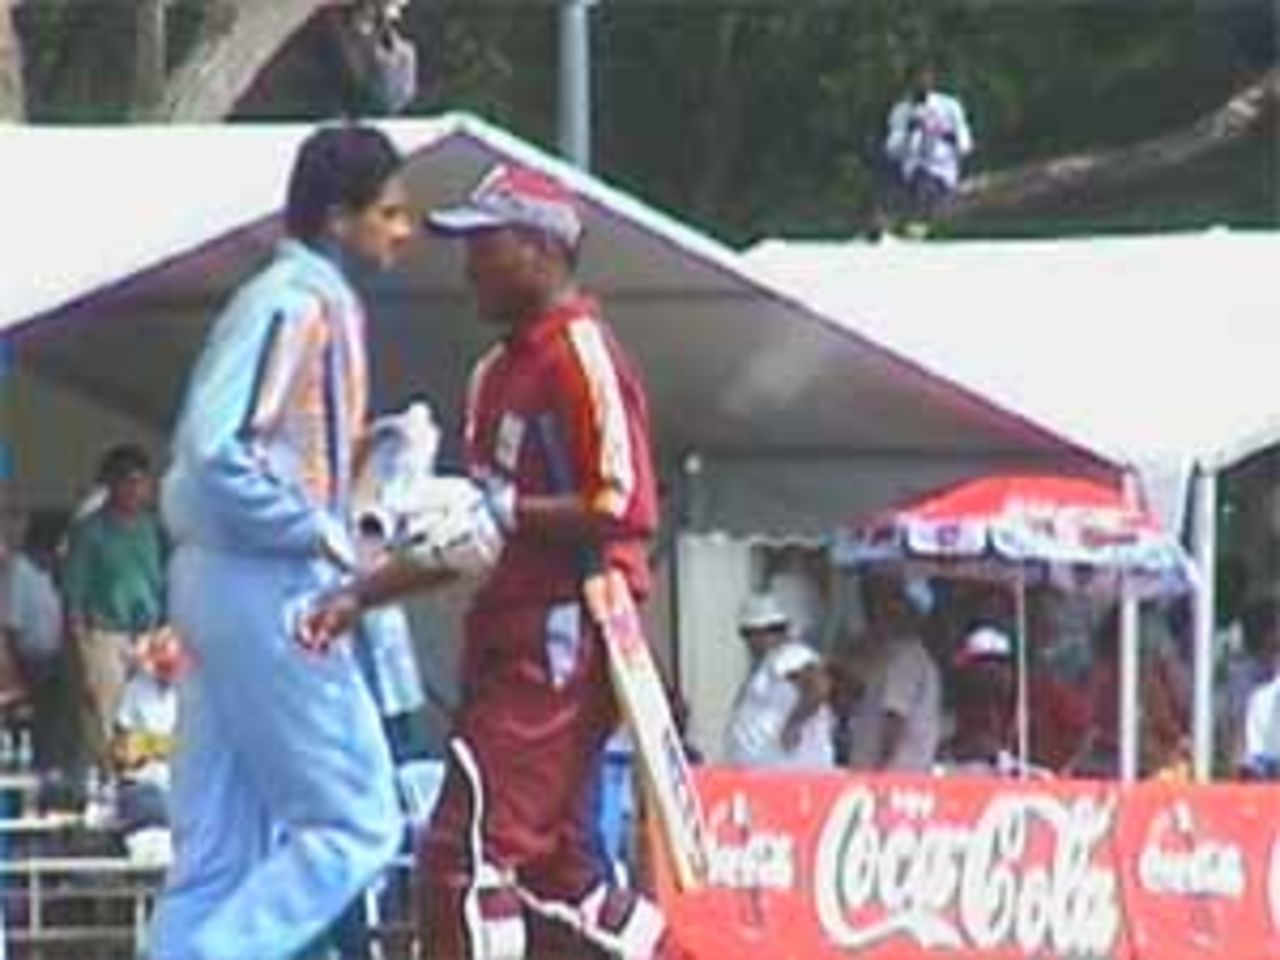 Lara exits after dazzling the Singapore crowds, India v West Indies (3rd ODI), Coca-Cola Singapore Challenge, 1999-2000, Kallang Ground, Singapore, 5 Sep 1999.